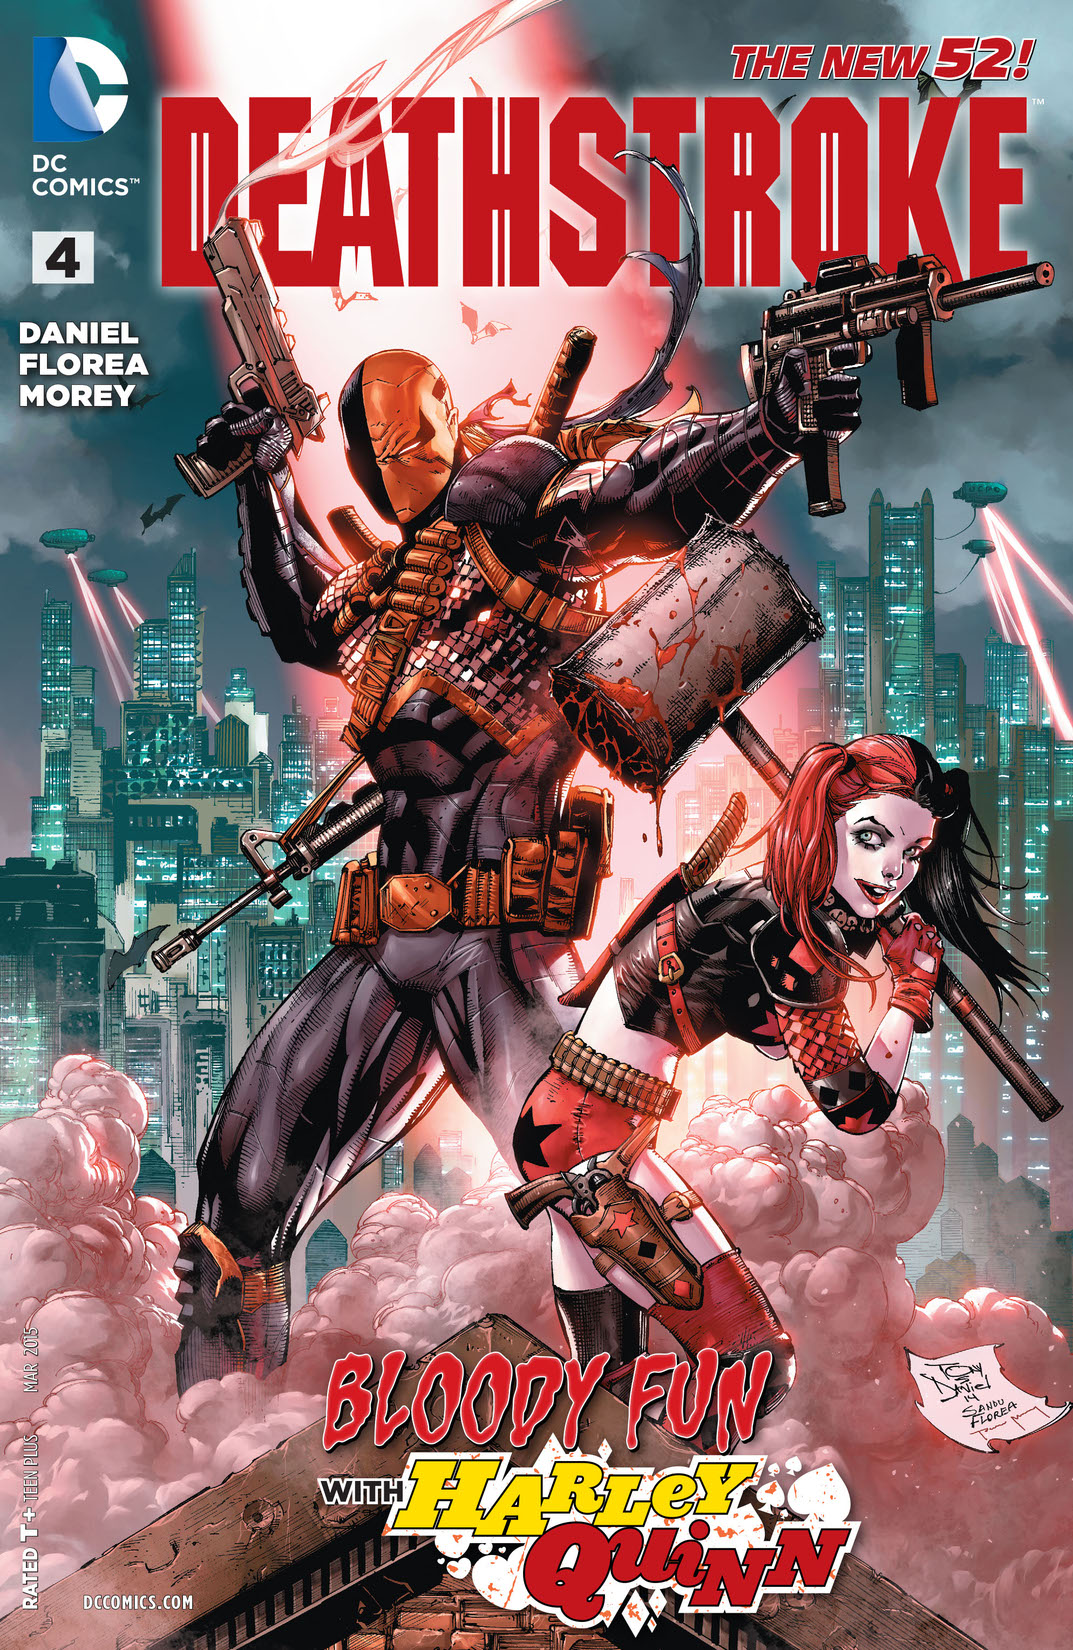 Deathstroke (2014-) #4 preview images